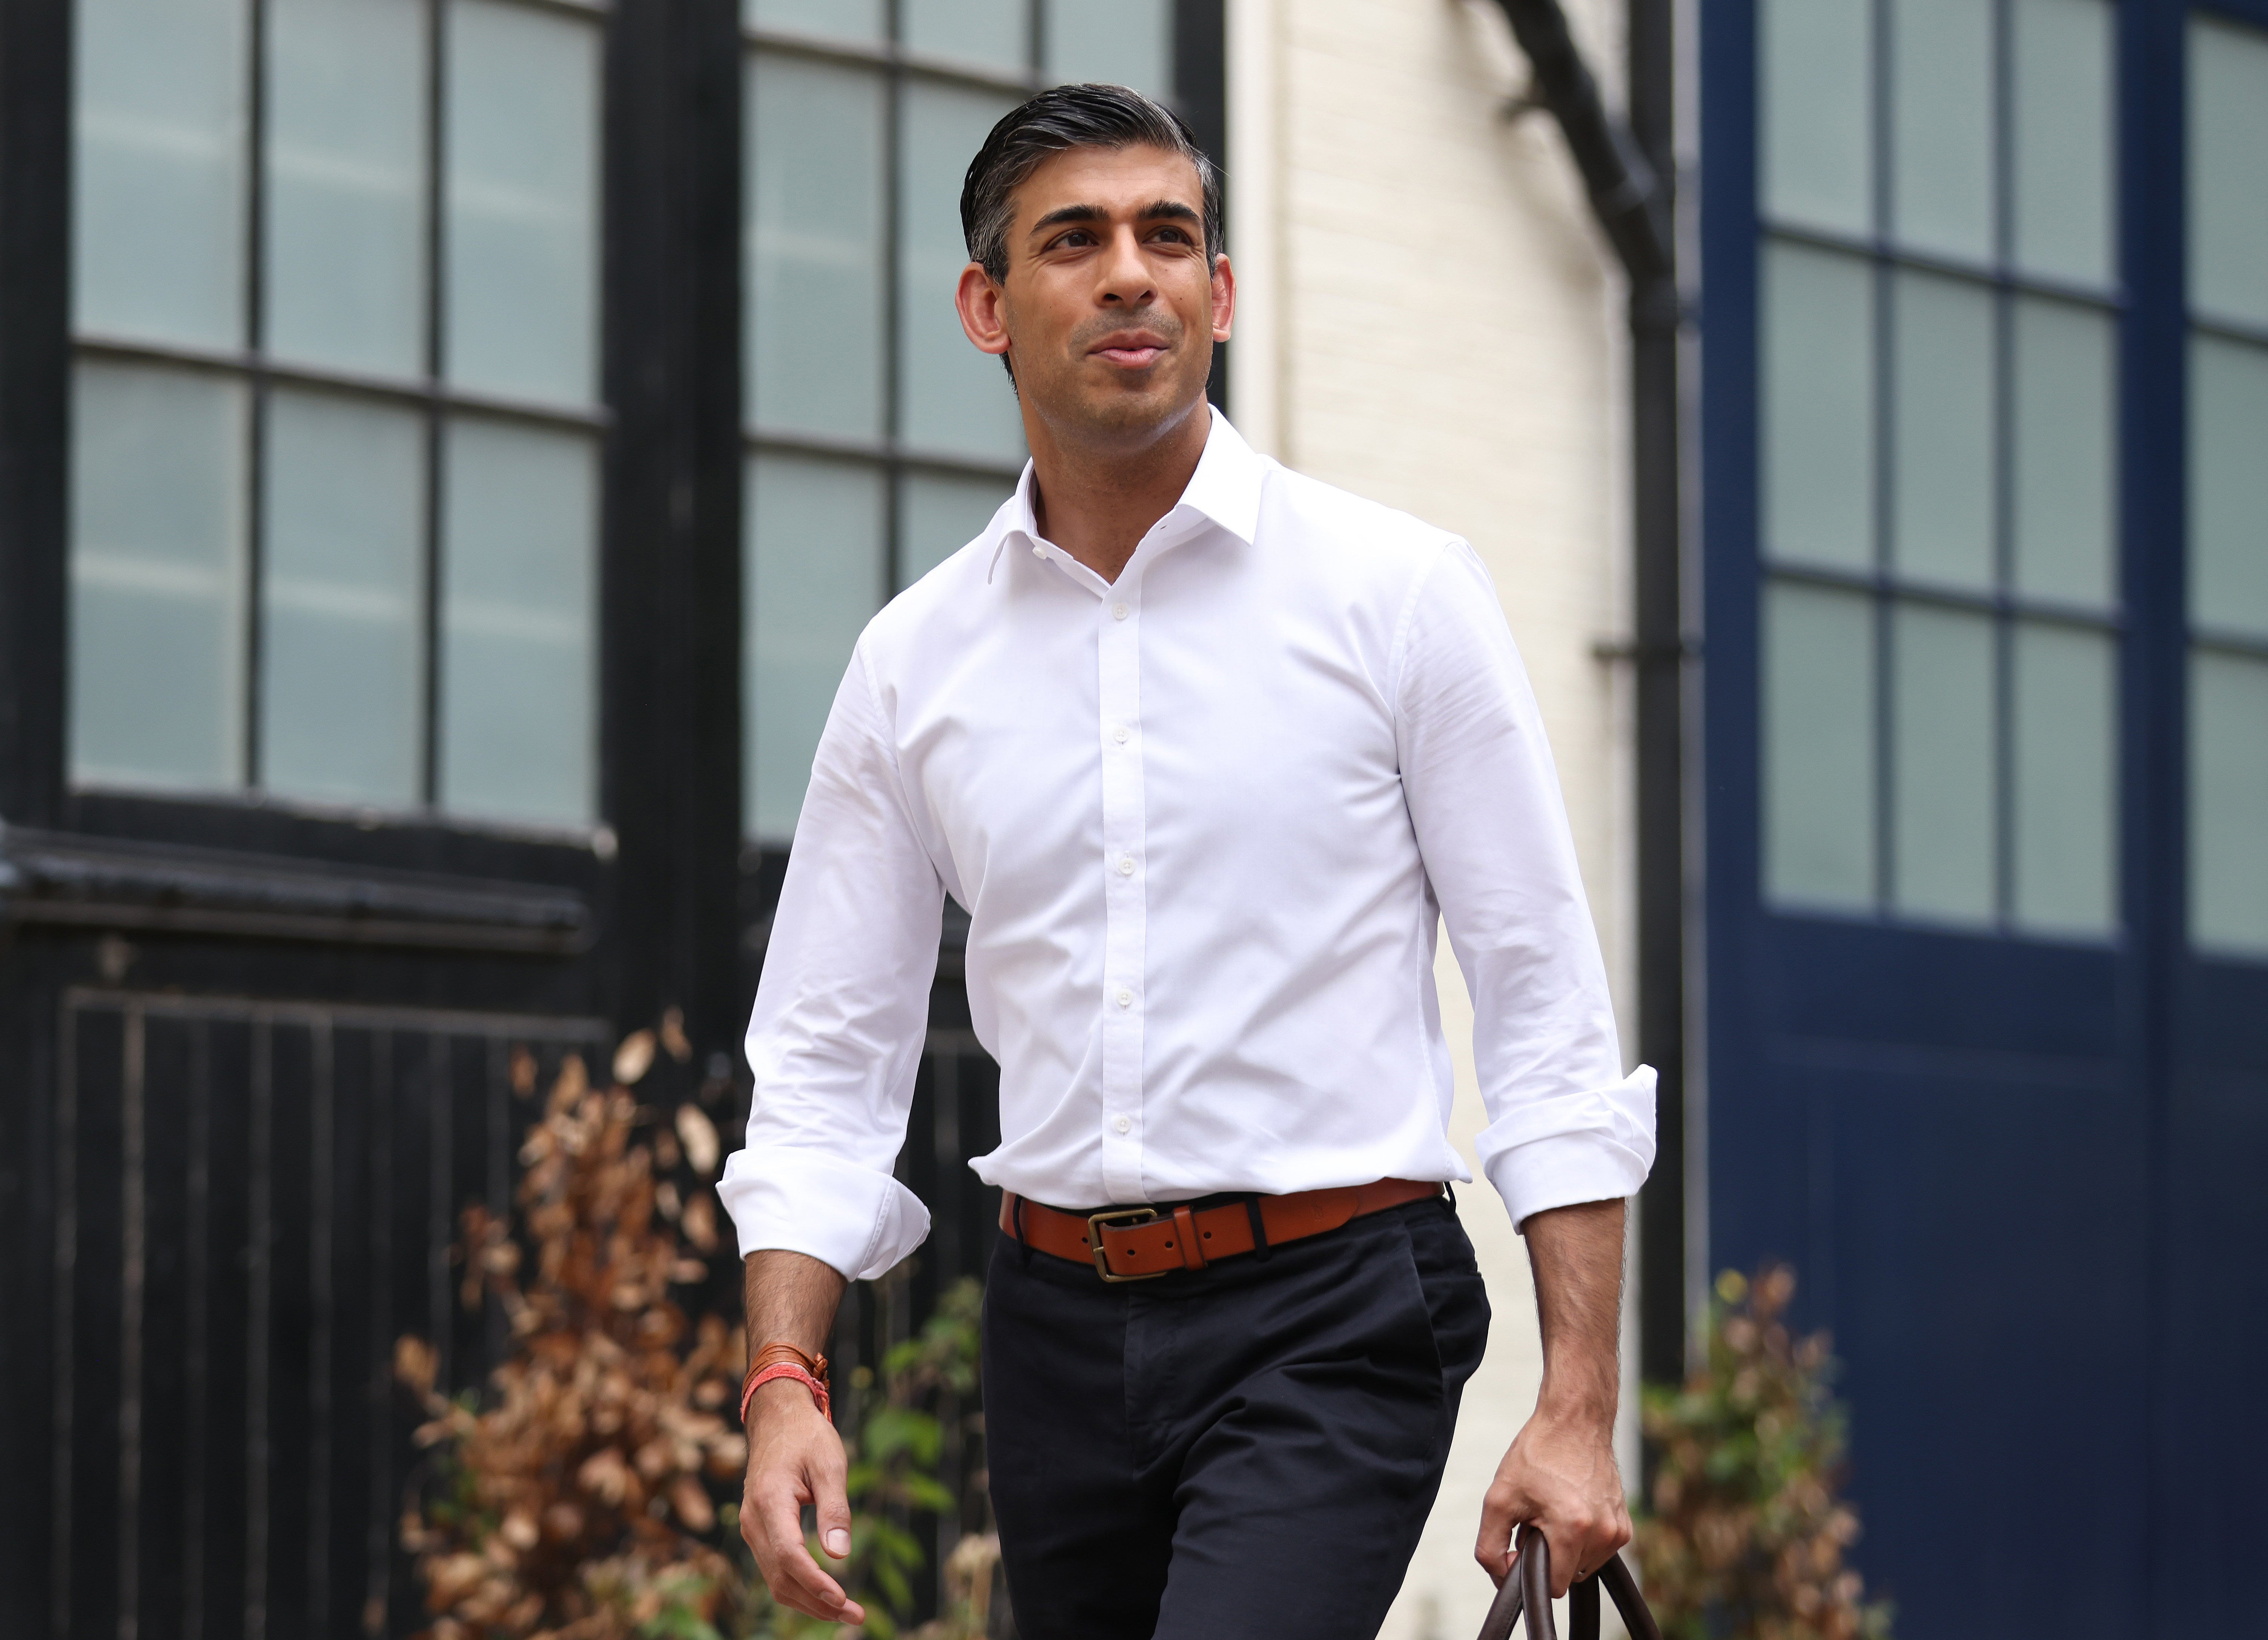 Rishi Sunak has positioned himself as the grown-up candidate who looks at the reality of the nation’s finances